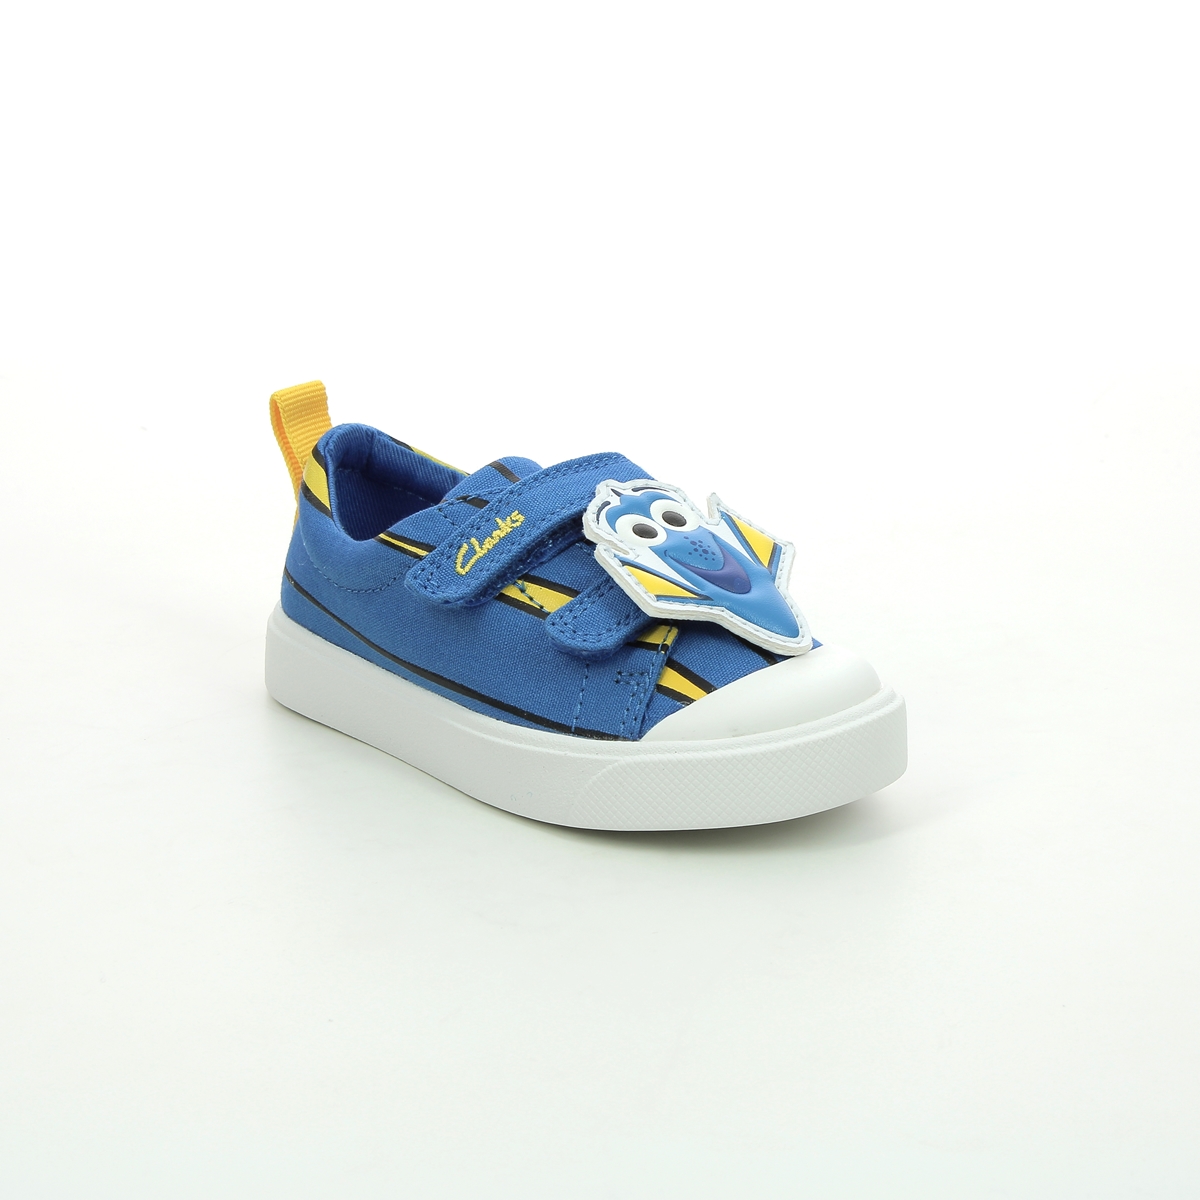 Clarks City Nemo T Blue Kids Toddler Boys Trainers 5766-16F in a Plain Canvas in Size 4.5